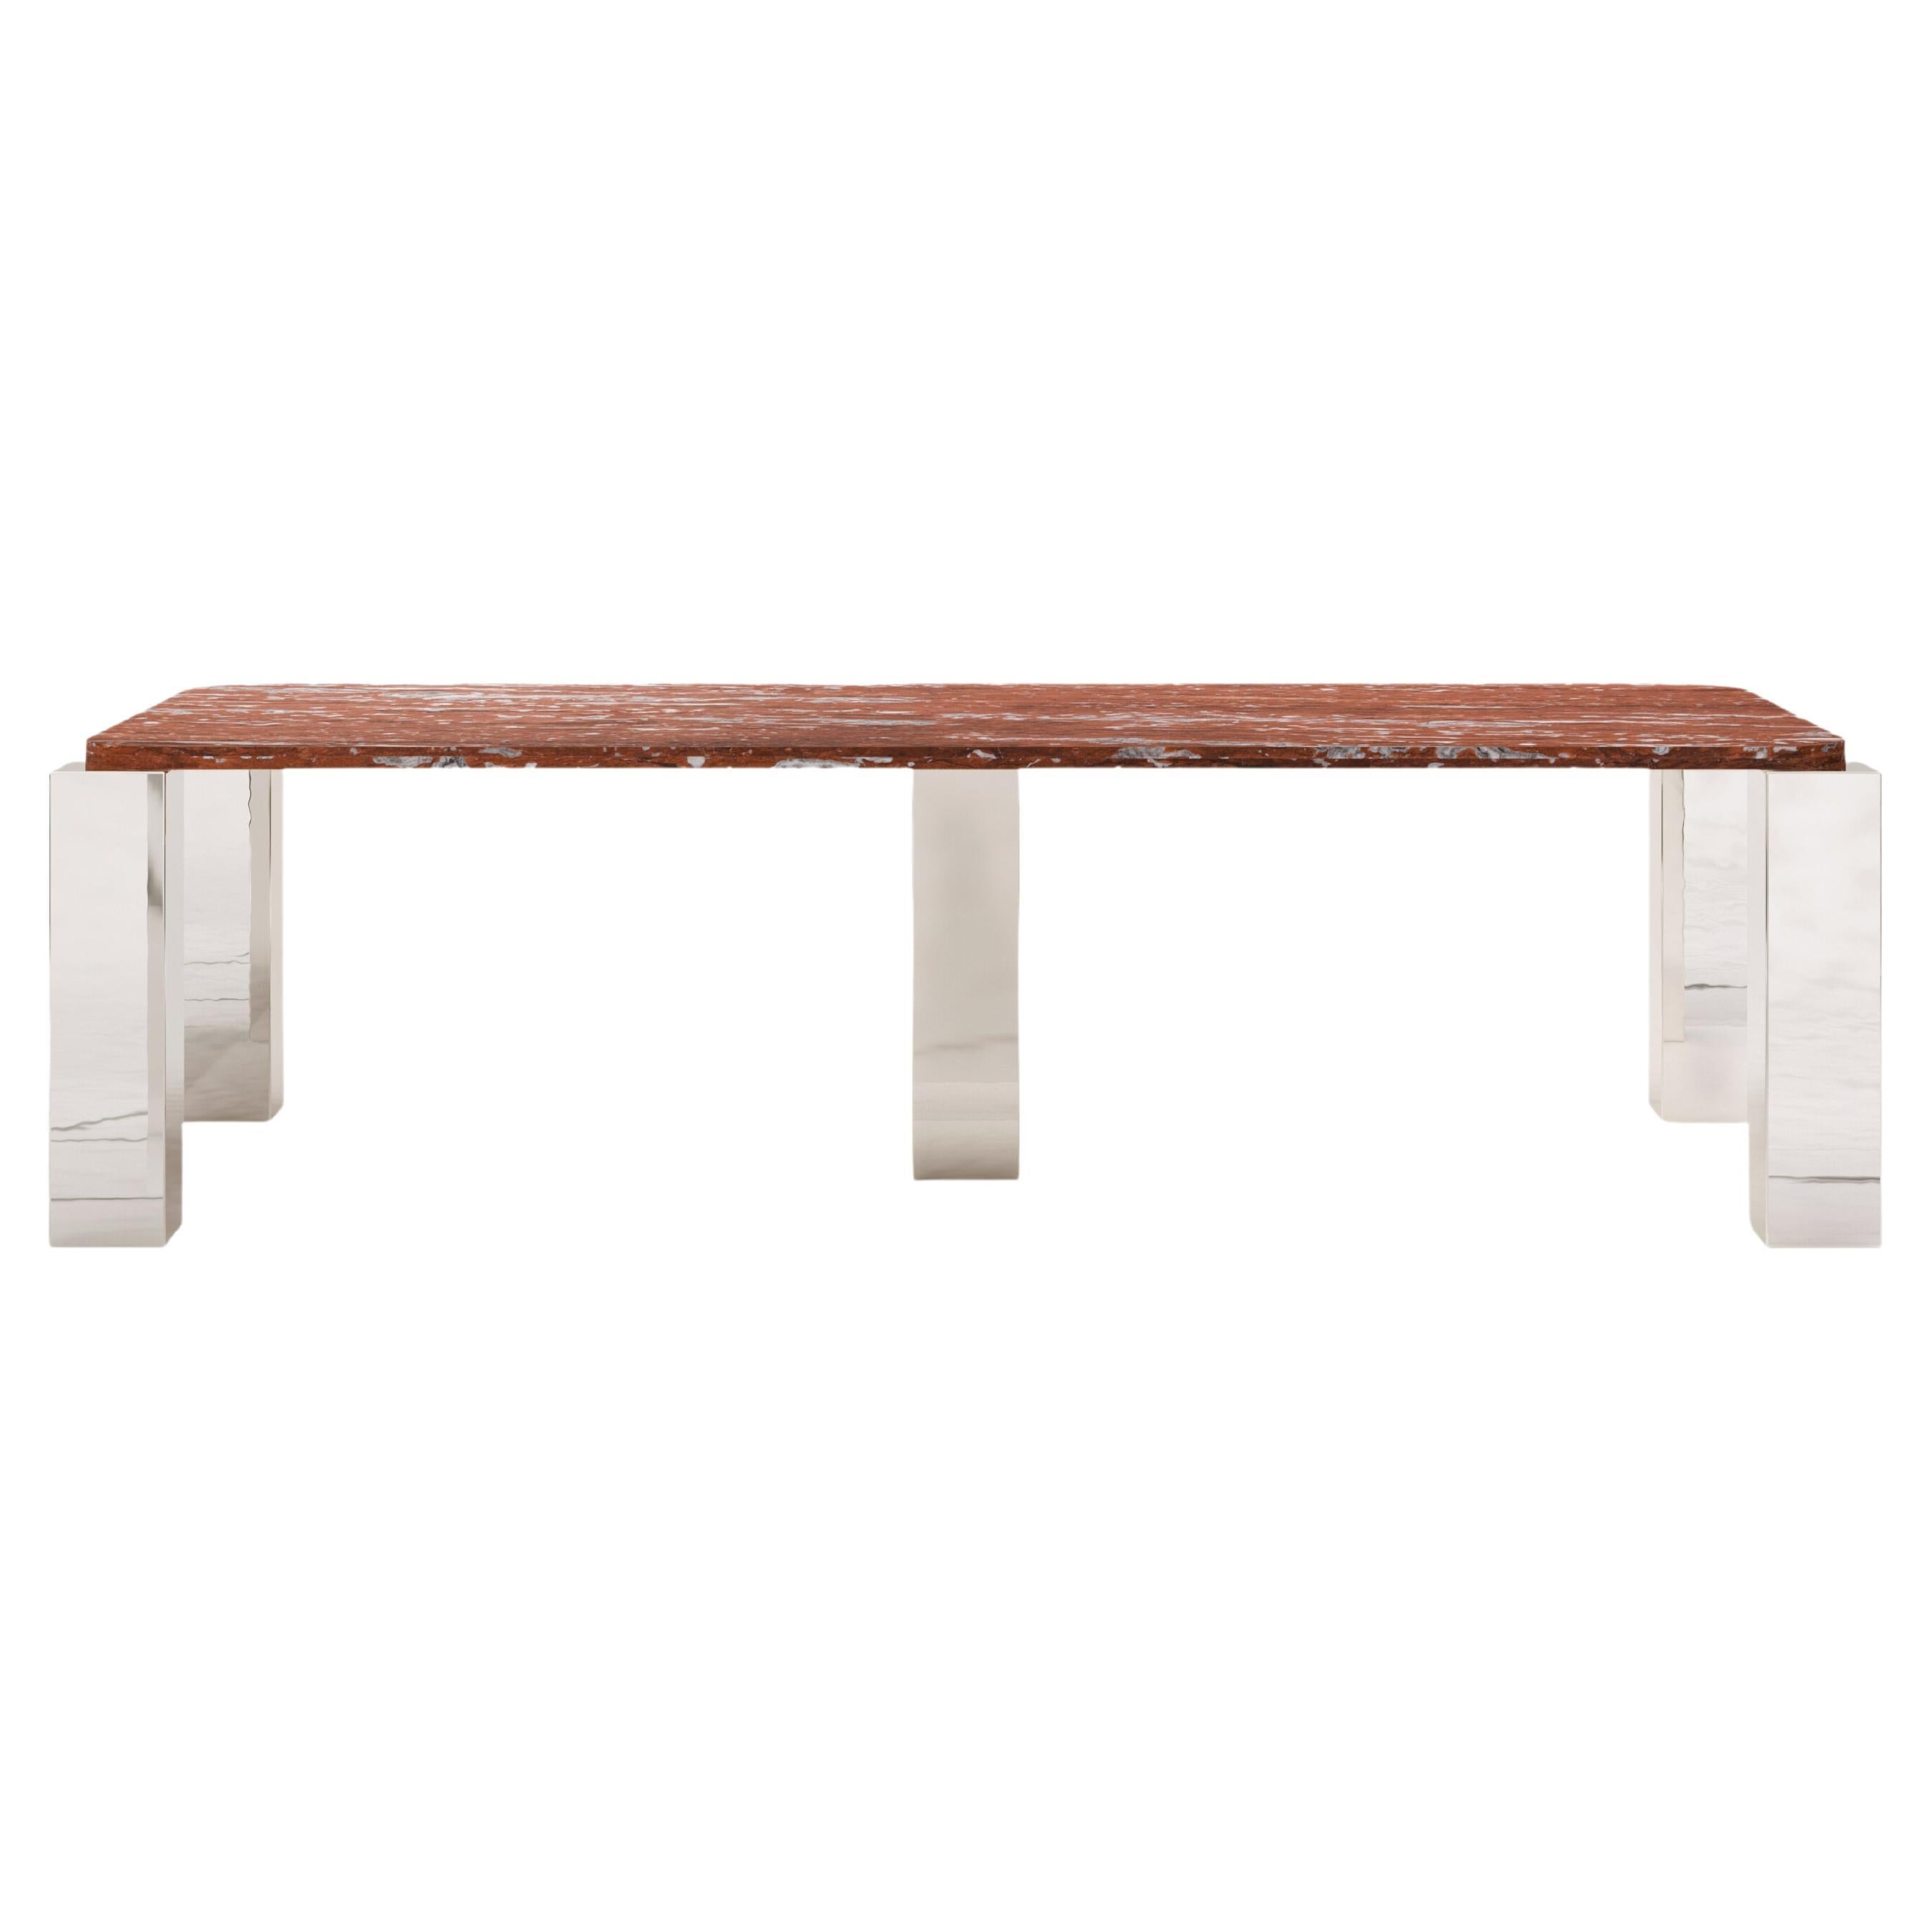 FORM(LA) Cubo Rectangle Dining Table 110”L x 50”W x 30”H Francia Marble & Chrome For Sale